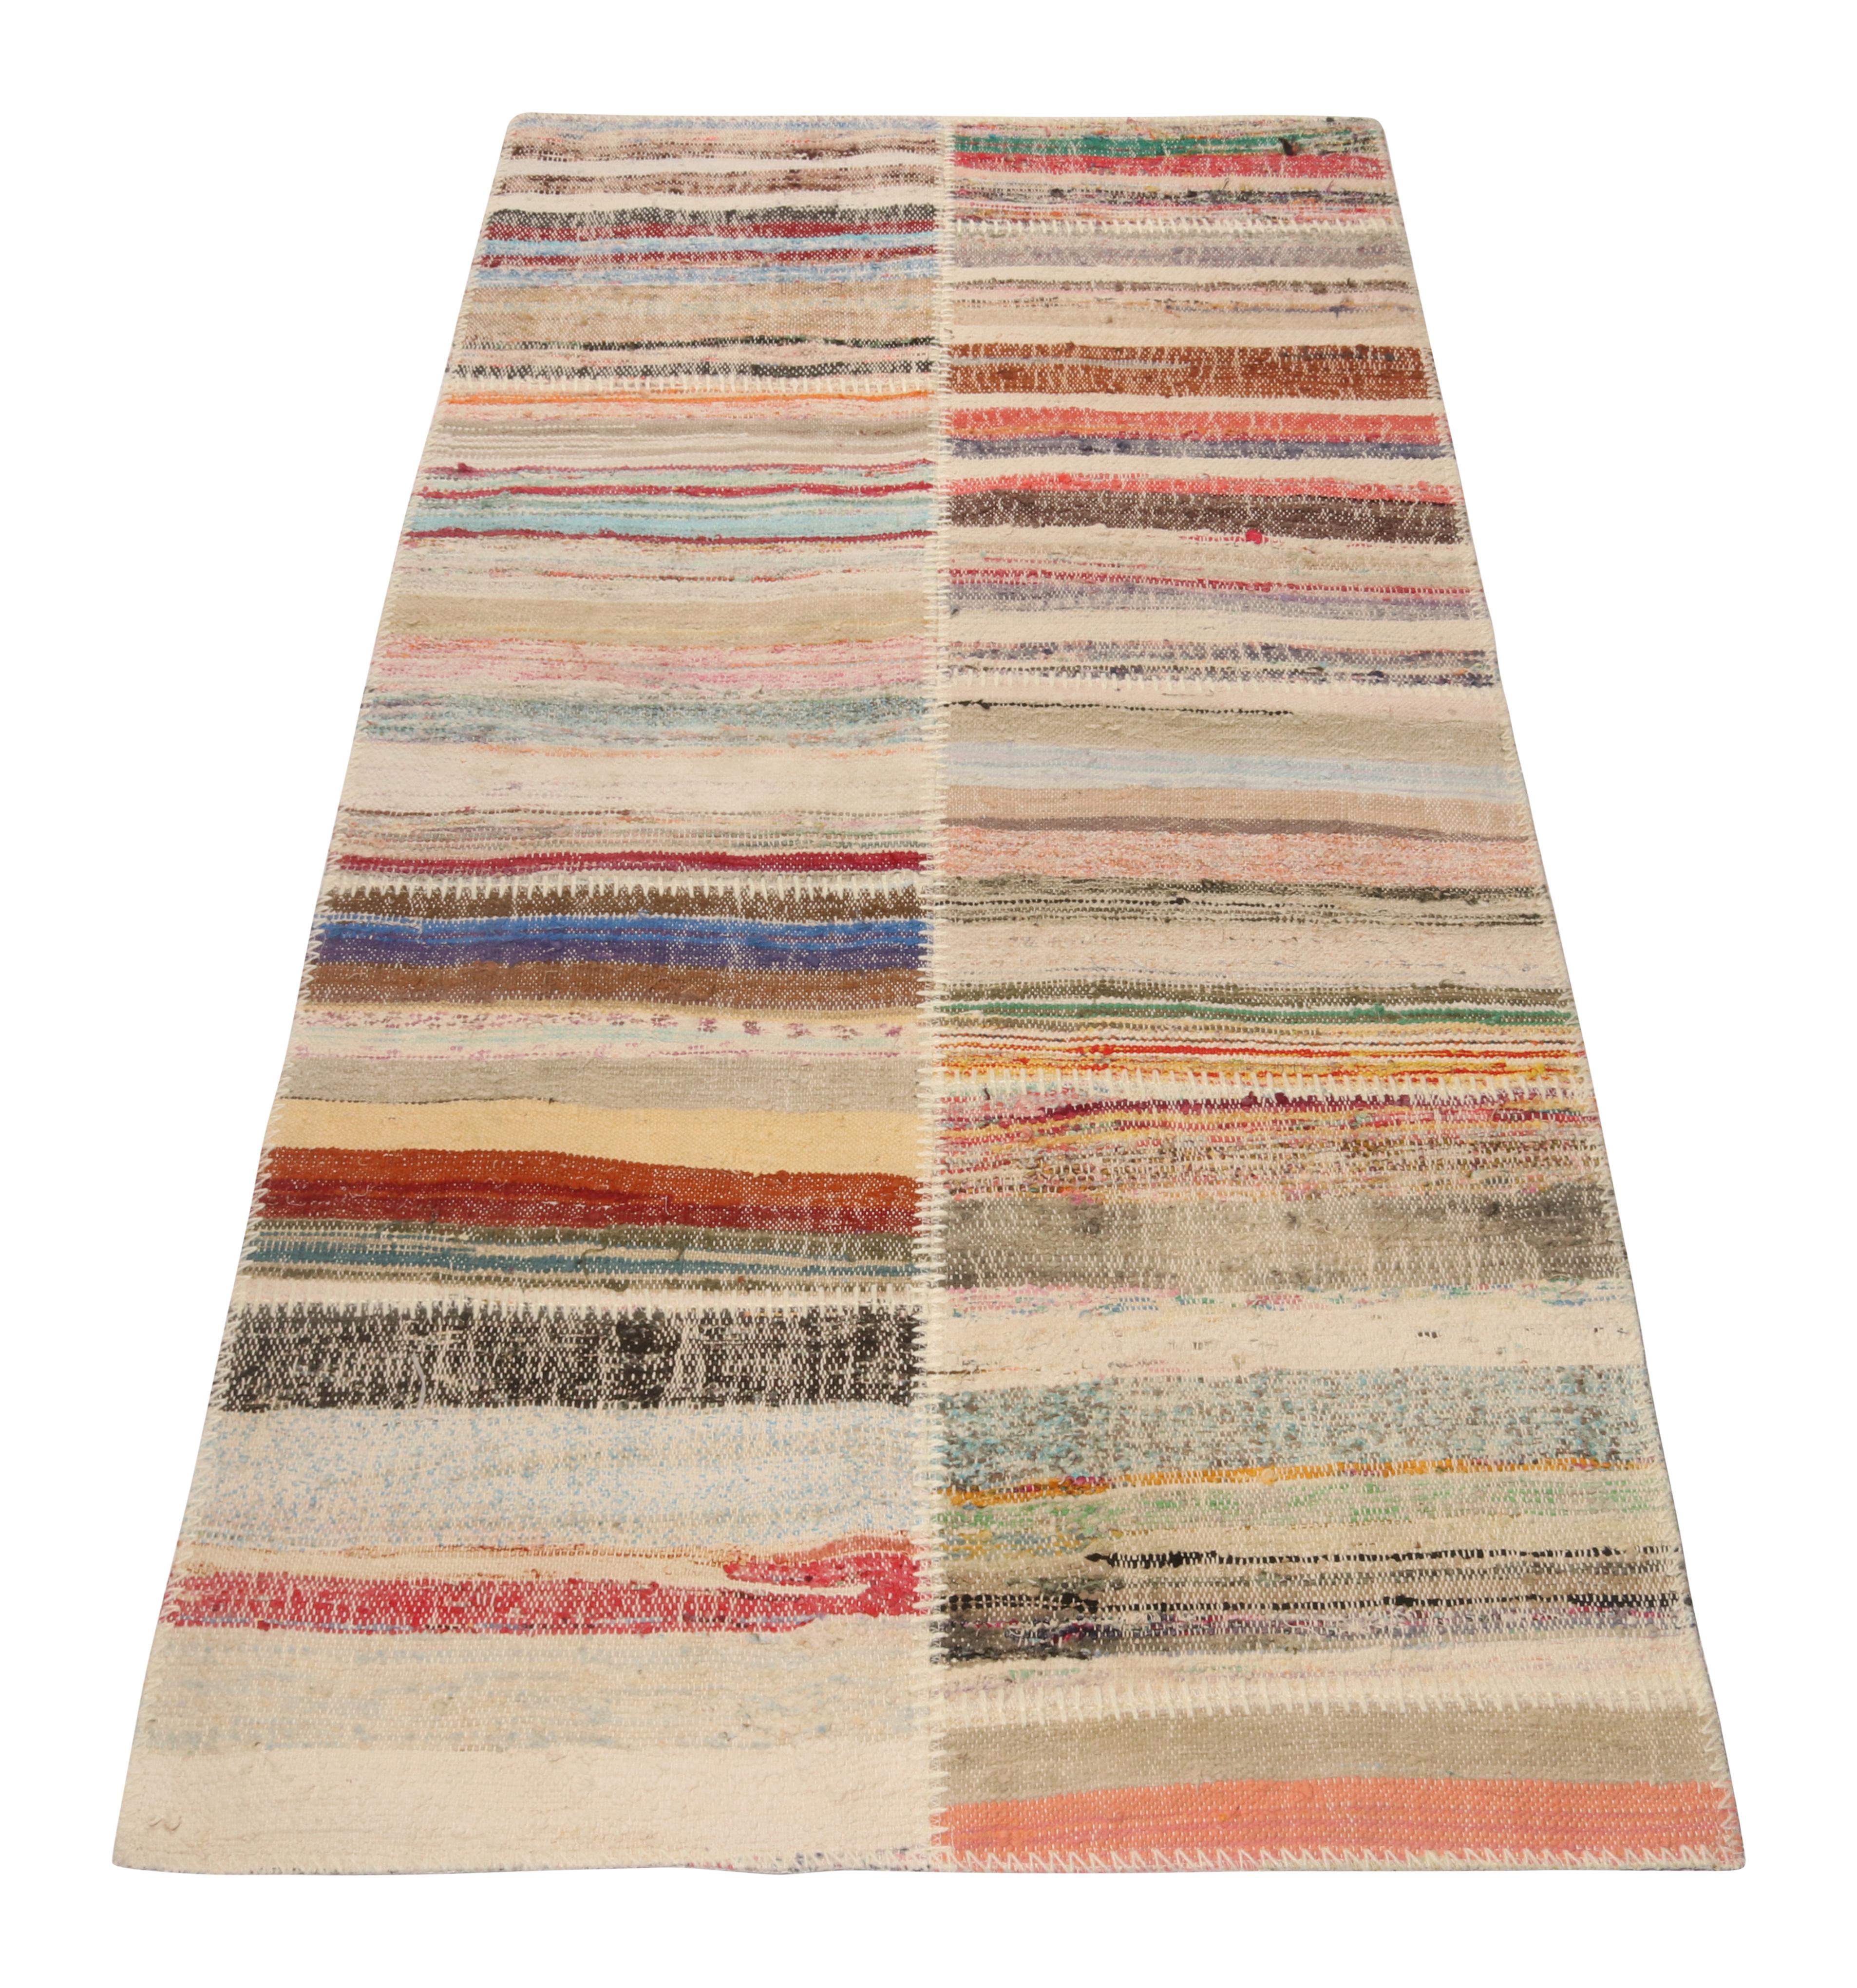 Handwoven in wool, Rug & Kilim presents a 3x6 runner from their innovative new patchwork kilim collection. 

On the Design: 

This flat weave technique repurposes vintage yarns in polychromatic stripes and striae, achieving a playful look with